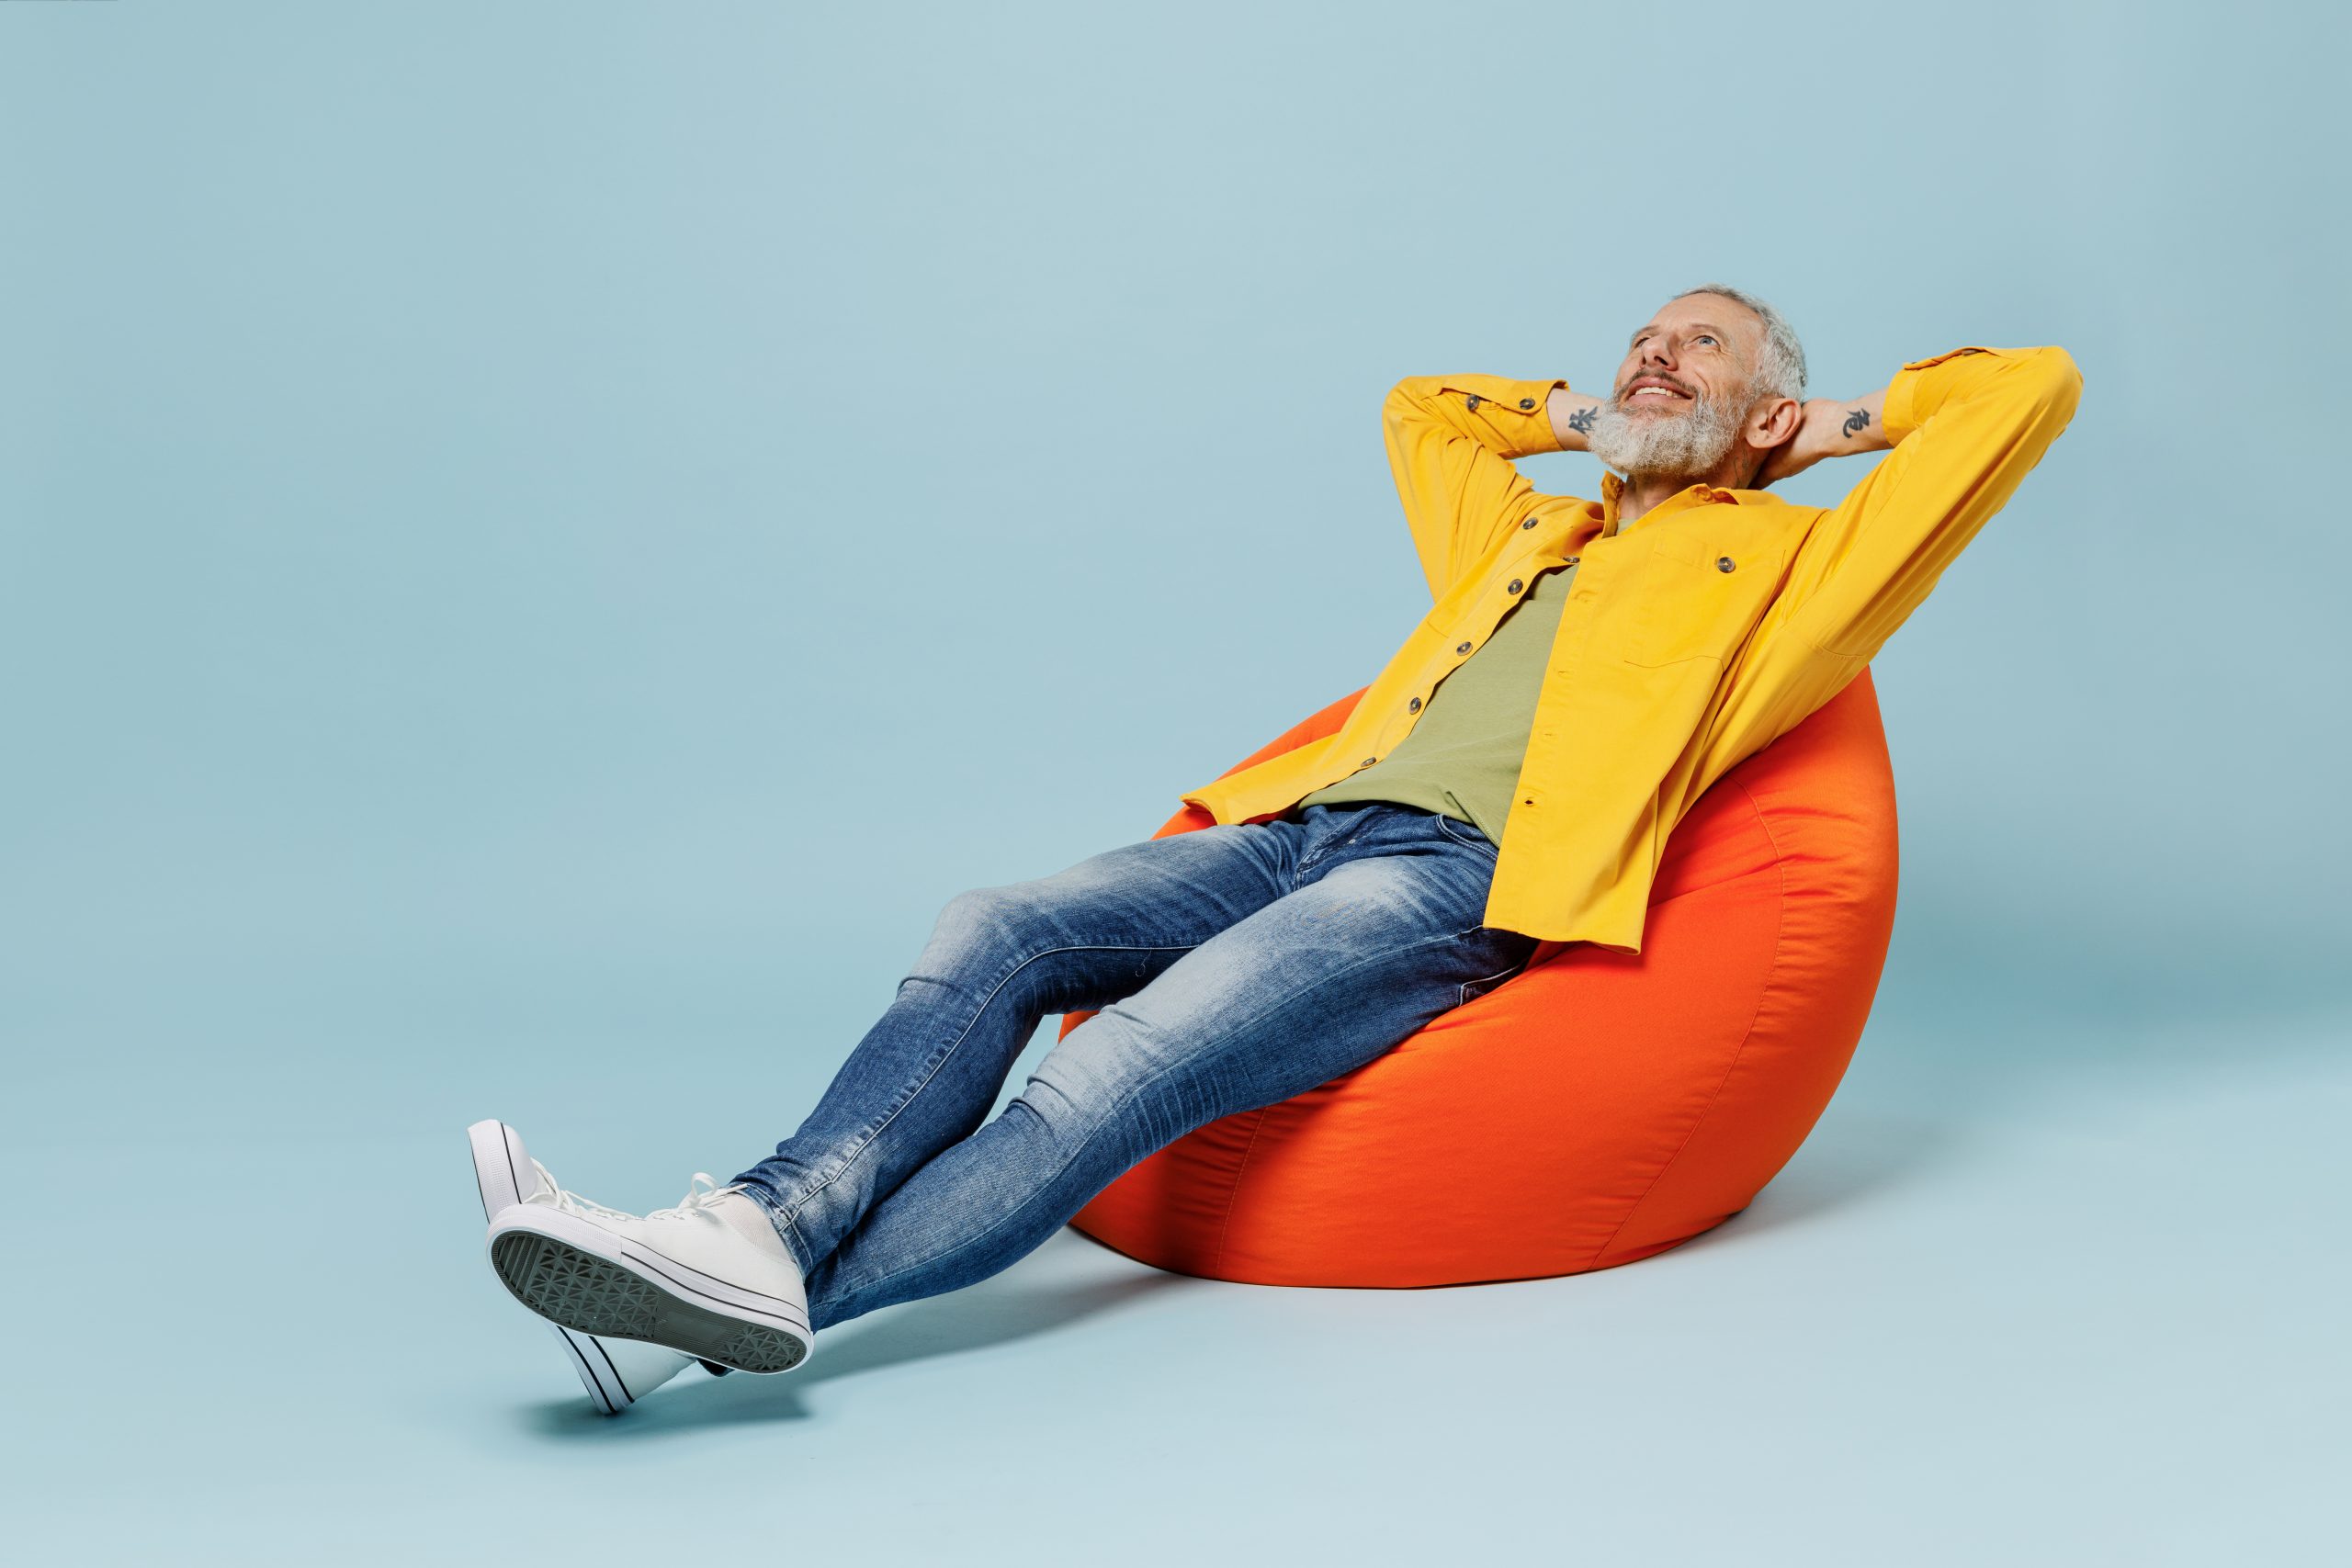 Full body sleeping elderly gray-haired mustache bearded man 50s in yellow shirt sit in bag chair hold hands behind neck isolated on plain pastel light blue background studio. People lifestyle concept